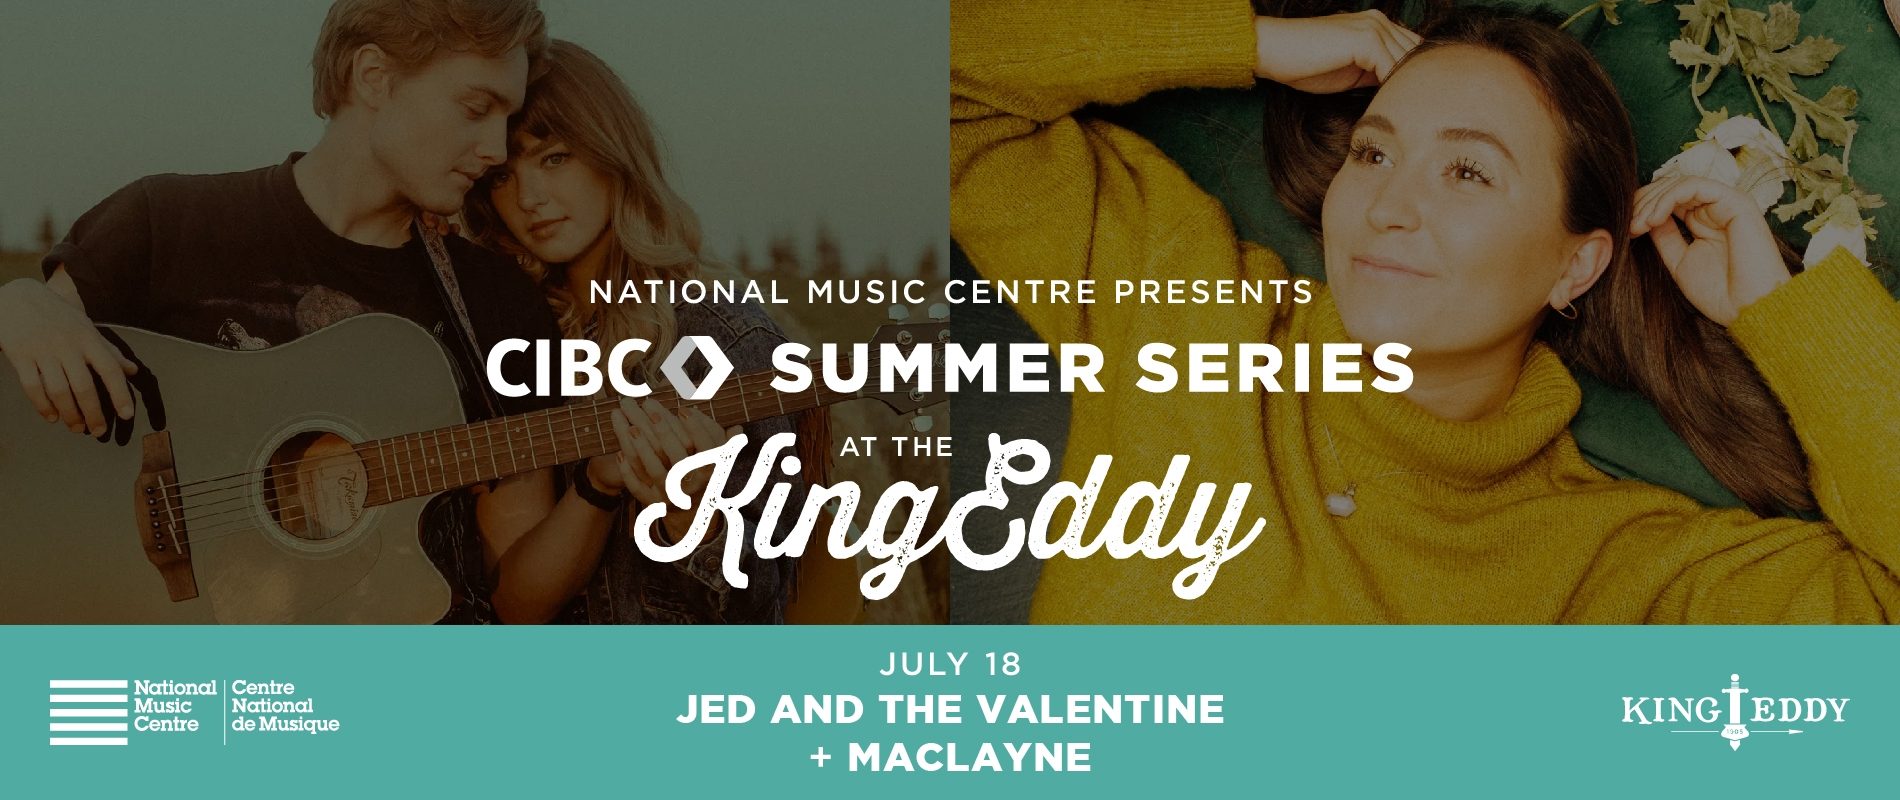 NMC Presents: CIBC Summer Series at the King Eddy — Jed and the Valentine with Maclayne